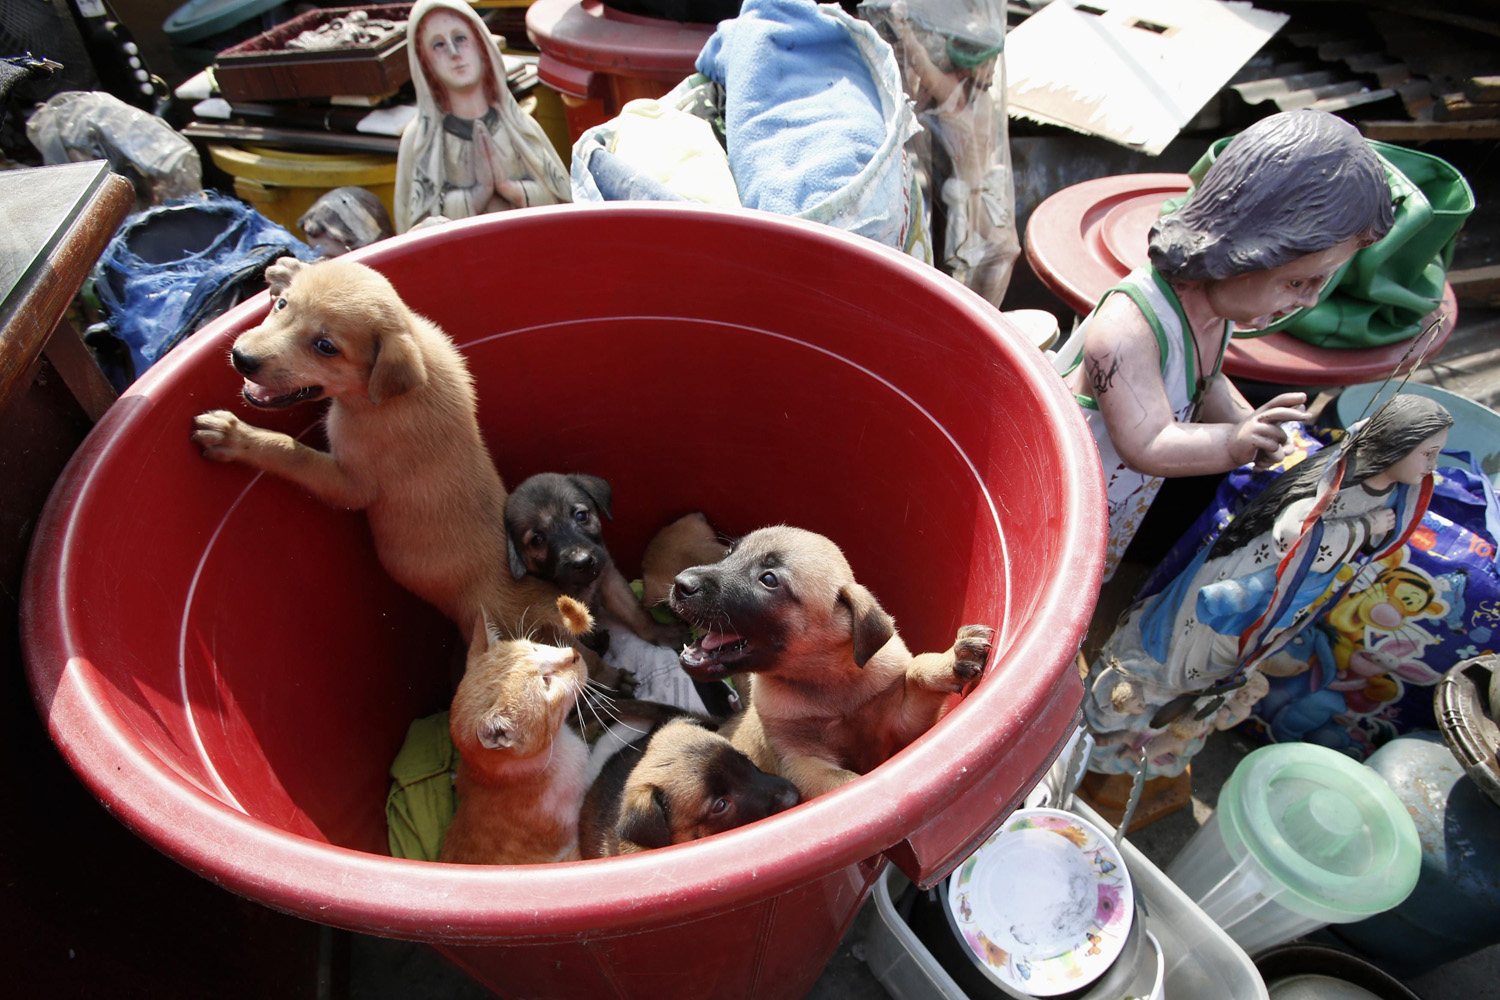 A slum dweller's pets, including puppies and a cat, look on from a plastic container next to religious statues and other belongings, after a squatter colony was demolished in Tondo, Manila April 23, 2014.